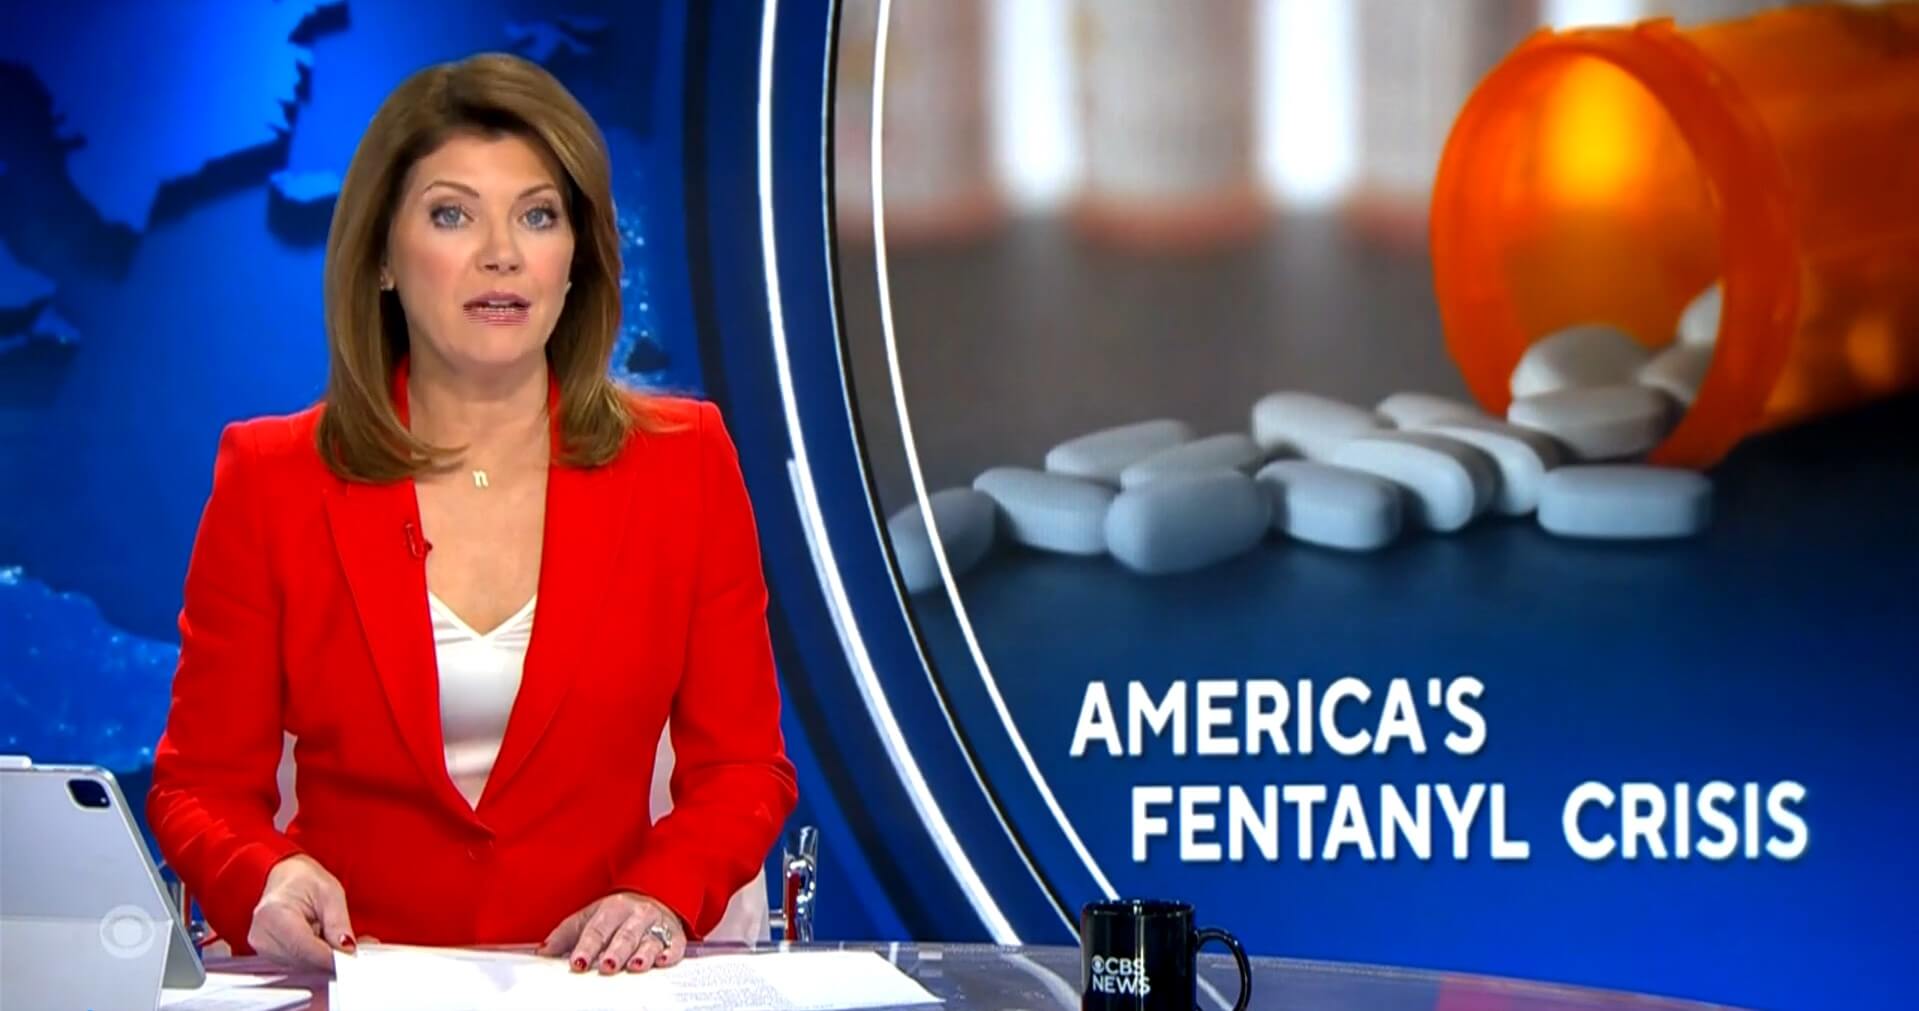 A screen capture of the CBS News broadcast titled "America's Fentanyl Crisis"